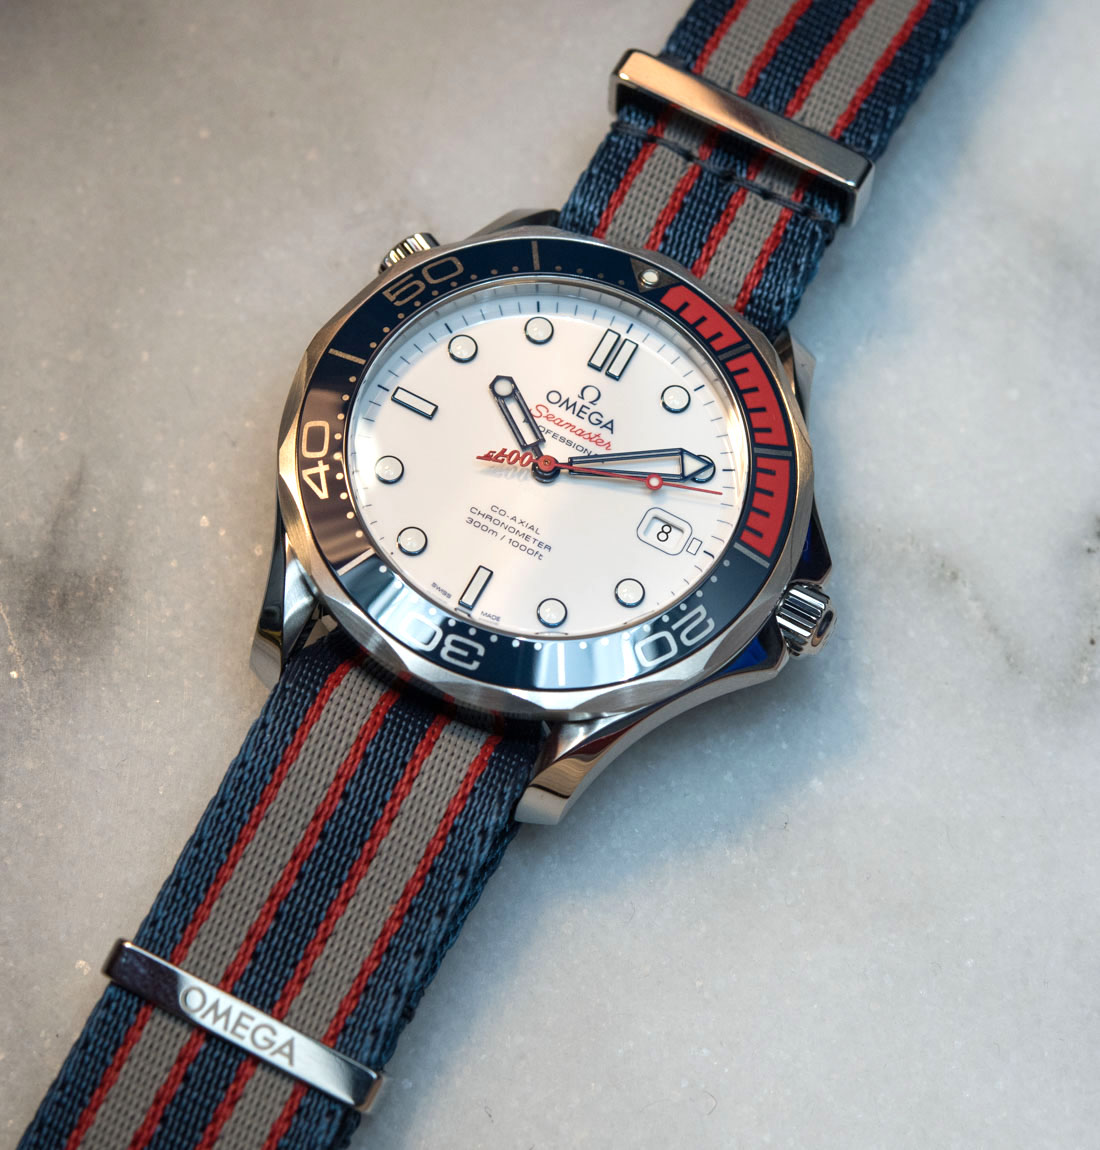 Omega Seamaster Diver 300M “Commander’s Watch” Limited Edition 腕表評測 腕上評測 